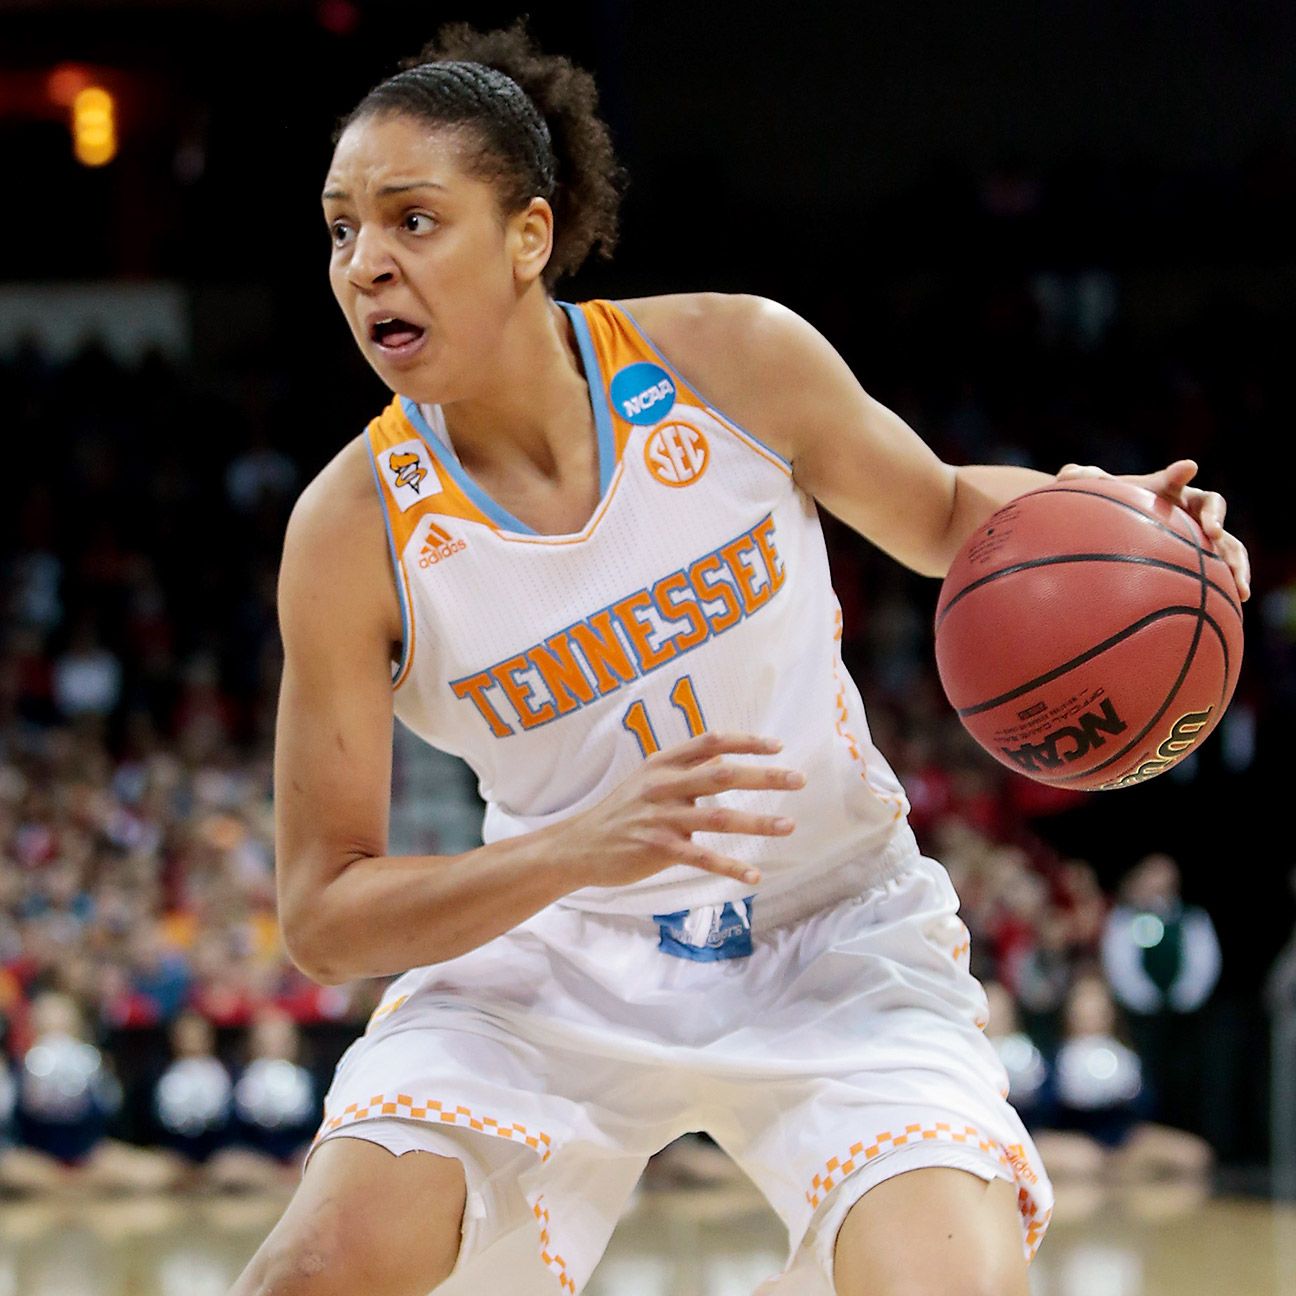 Persistence pays off as Tennessee Lady Volunteers rally in overtime1296 x 1296